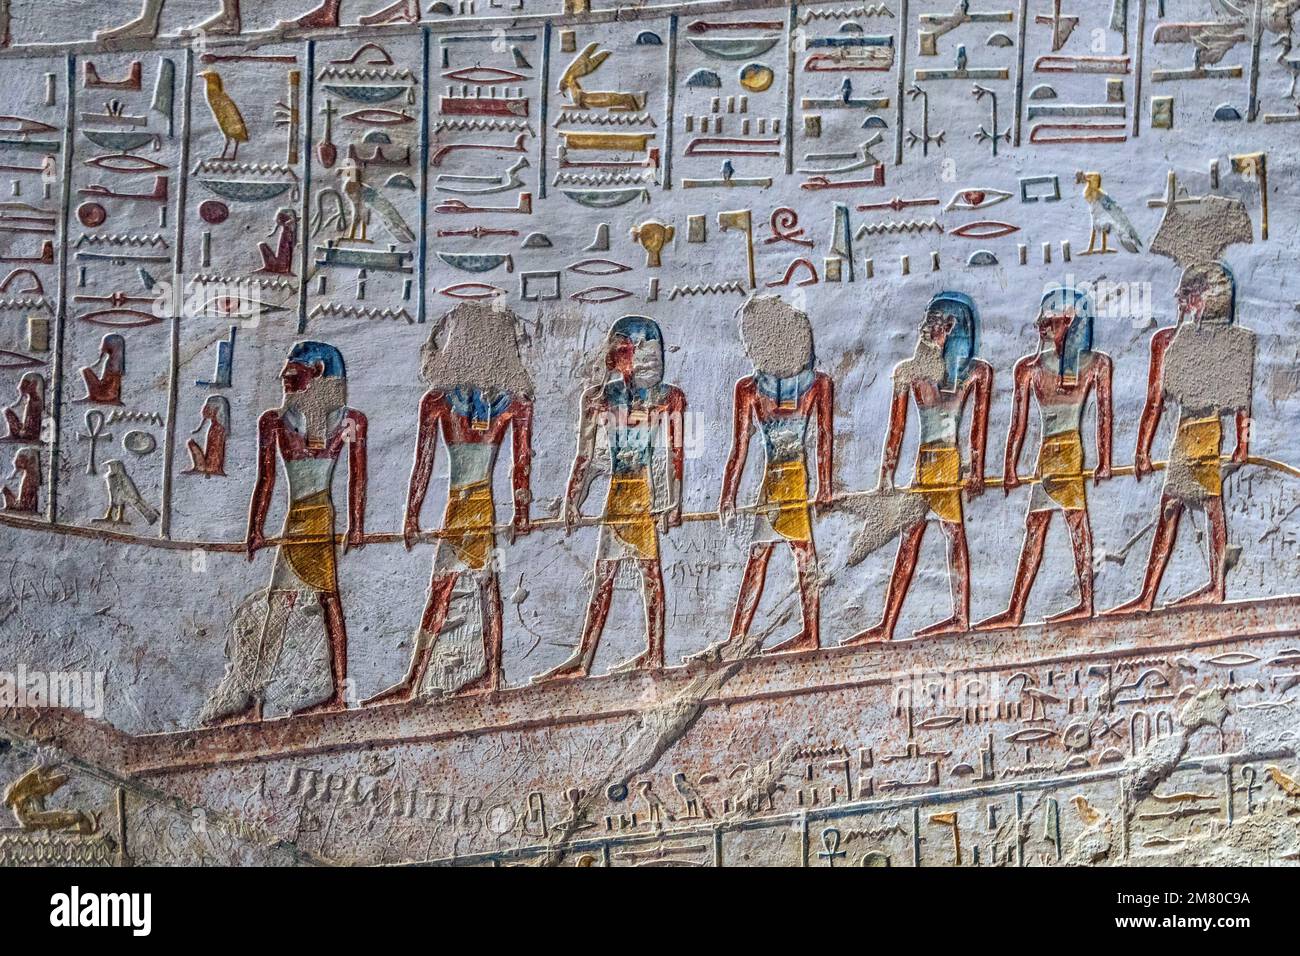 BAS-RELIEF AND FRESCOES PAINTED IN BRIGHT COLORS, EGYPTIAN HIEROGLYPHS, FIGURATIVE HOLY WRITINGS, TOMB OF THE PHARAOH MERENPTAH, VALLEY OF THE KINGS WHERE THE HYPOGEUM OF MANY PHARAOHS OF THE NEW EMPIRE CAN BE FOUND, LUXOR, EGYPT, AFRICA Stock Photo